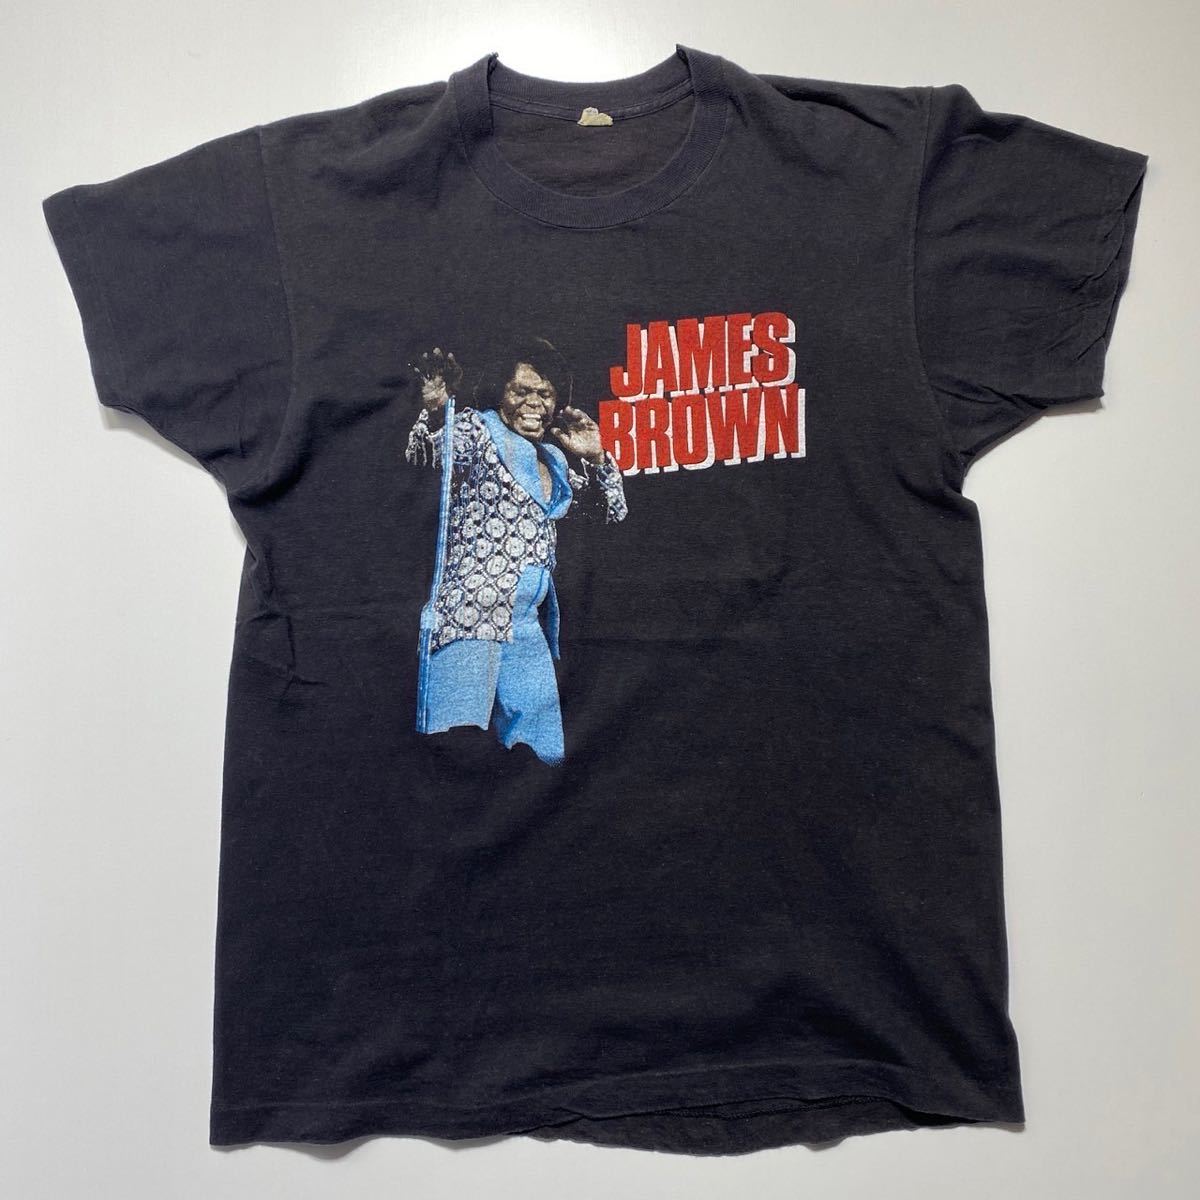 【XL】80s Vintage JAMES BROWN Living in America Tour Tee 80年代 ヴィンテージ ジェームスブラウン アメリカ ツアー Tシャツ 86年 G1665